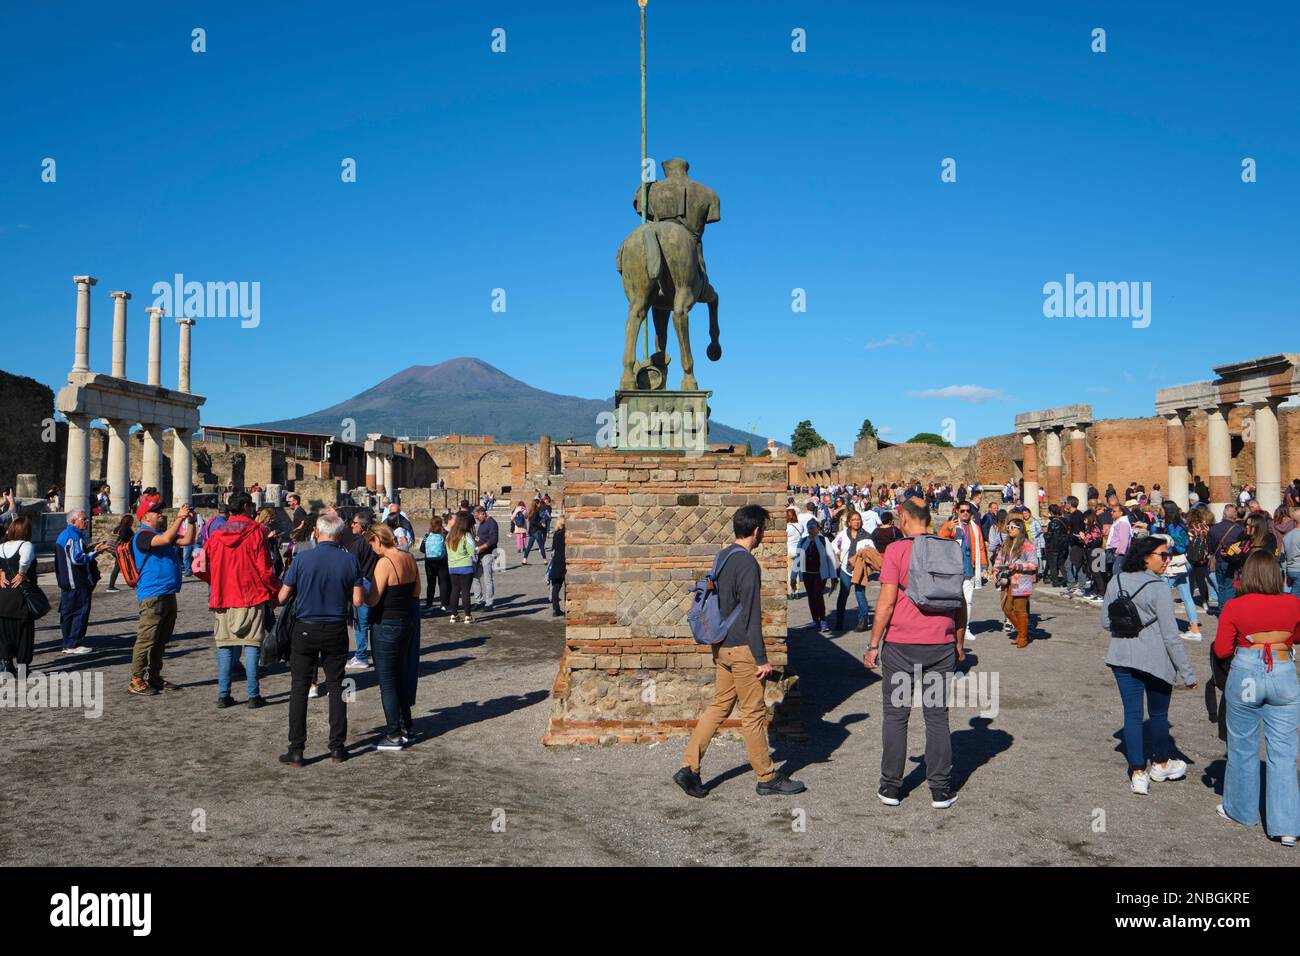 Groups of tourists, visitors pack, crowd the forum area, busy posing for photographs, selfies. At Pompeii Archaeological Park near Naples, Italy. Stock Photo